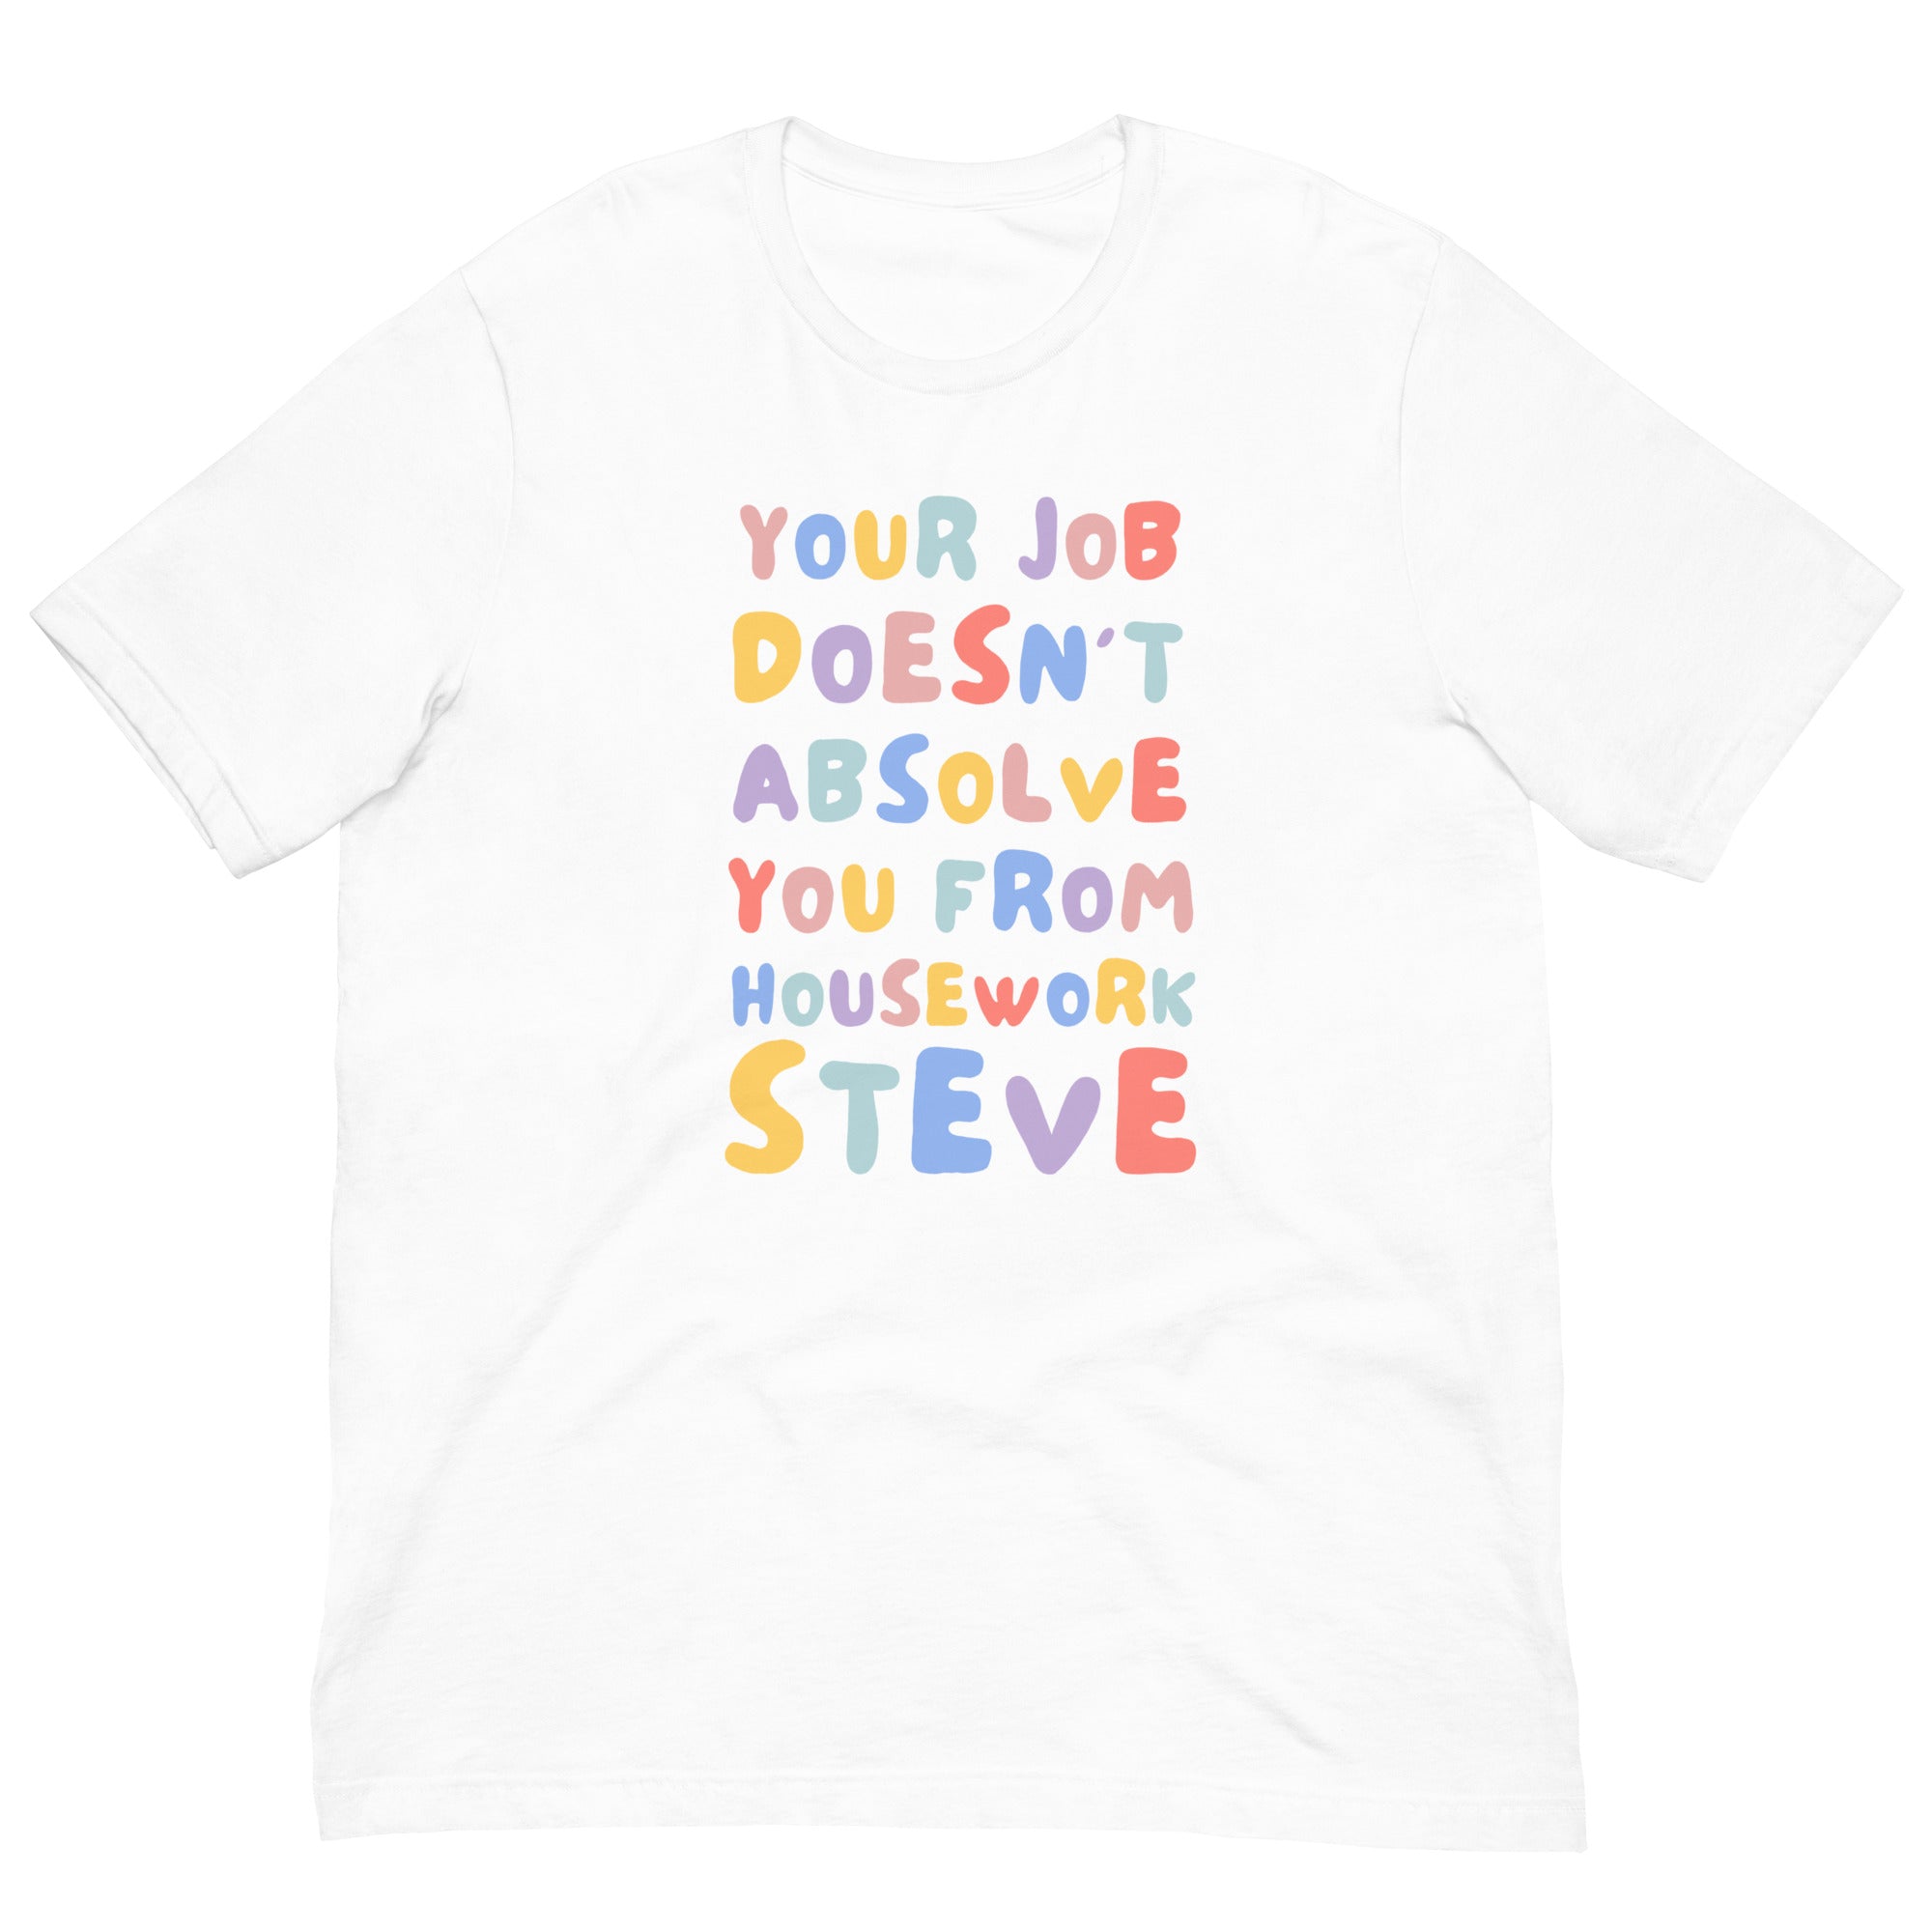 Your Job Doesn’t Absolve You From Housework Steve Unisex Feminist T-shirt - Shop Women’s Rights T-shirts - White